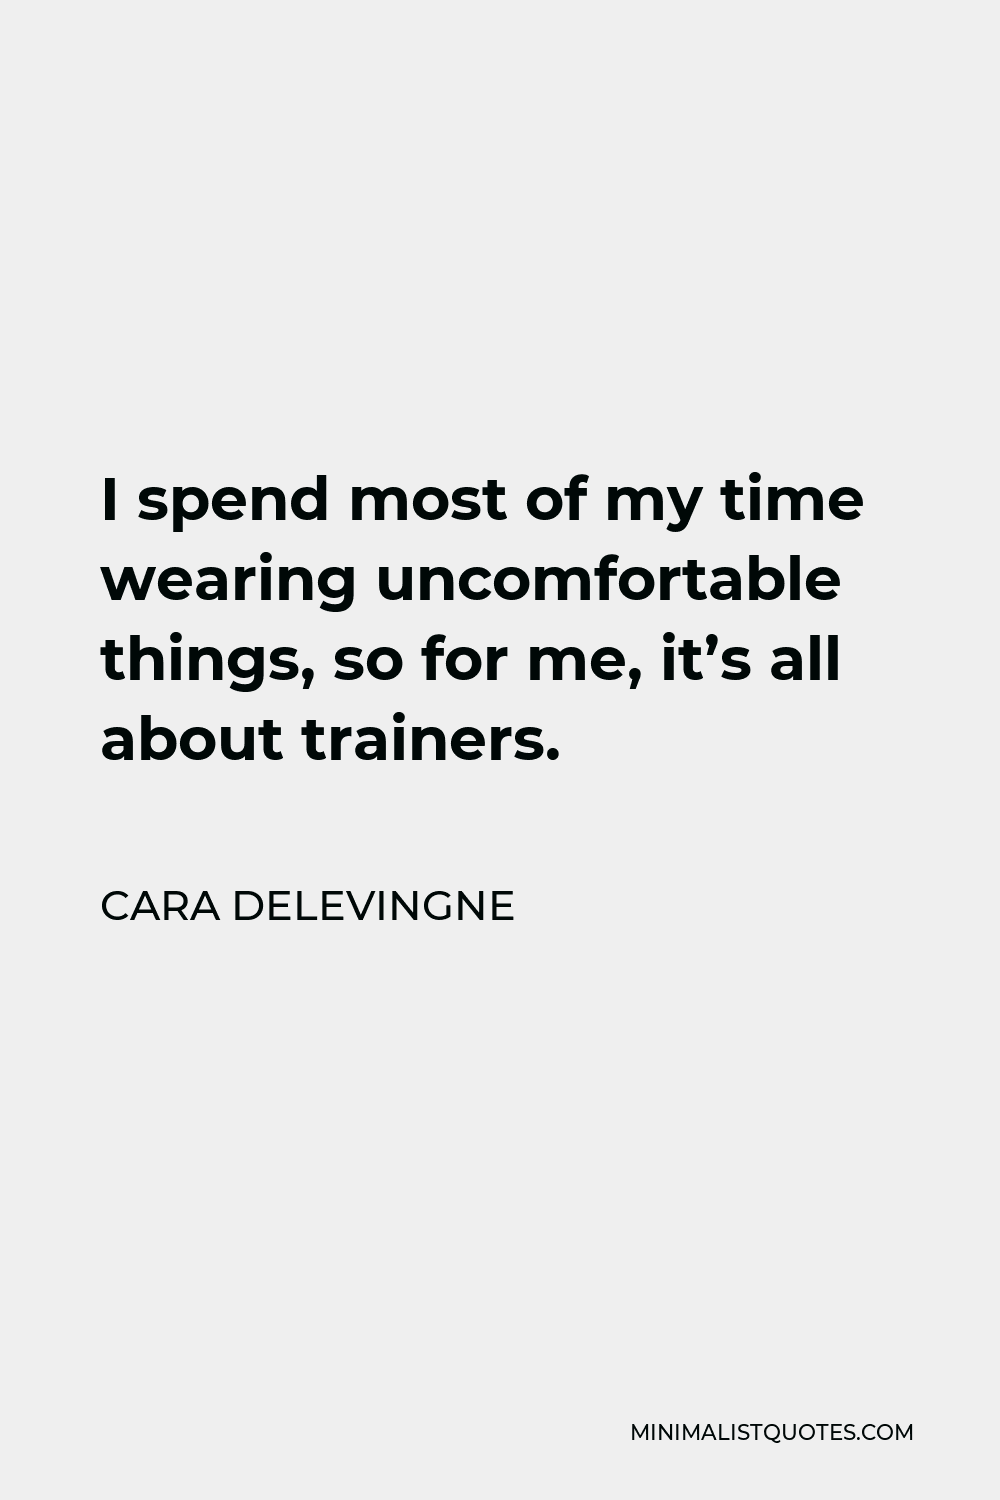 Cara Delevingne Quote - I spend most of my time wearing uncomfortable things, so for me, it’s all about trainers.